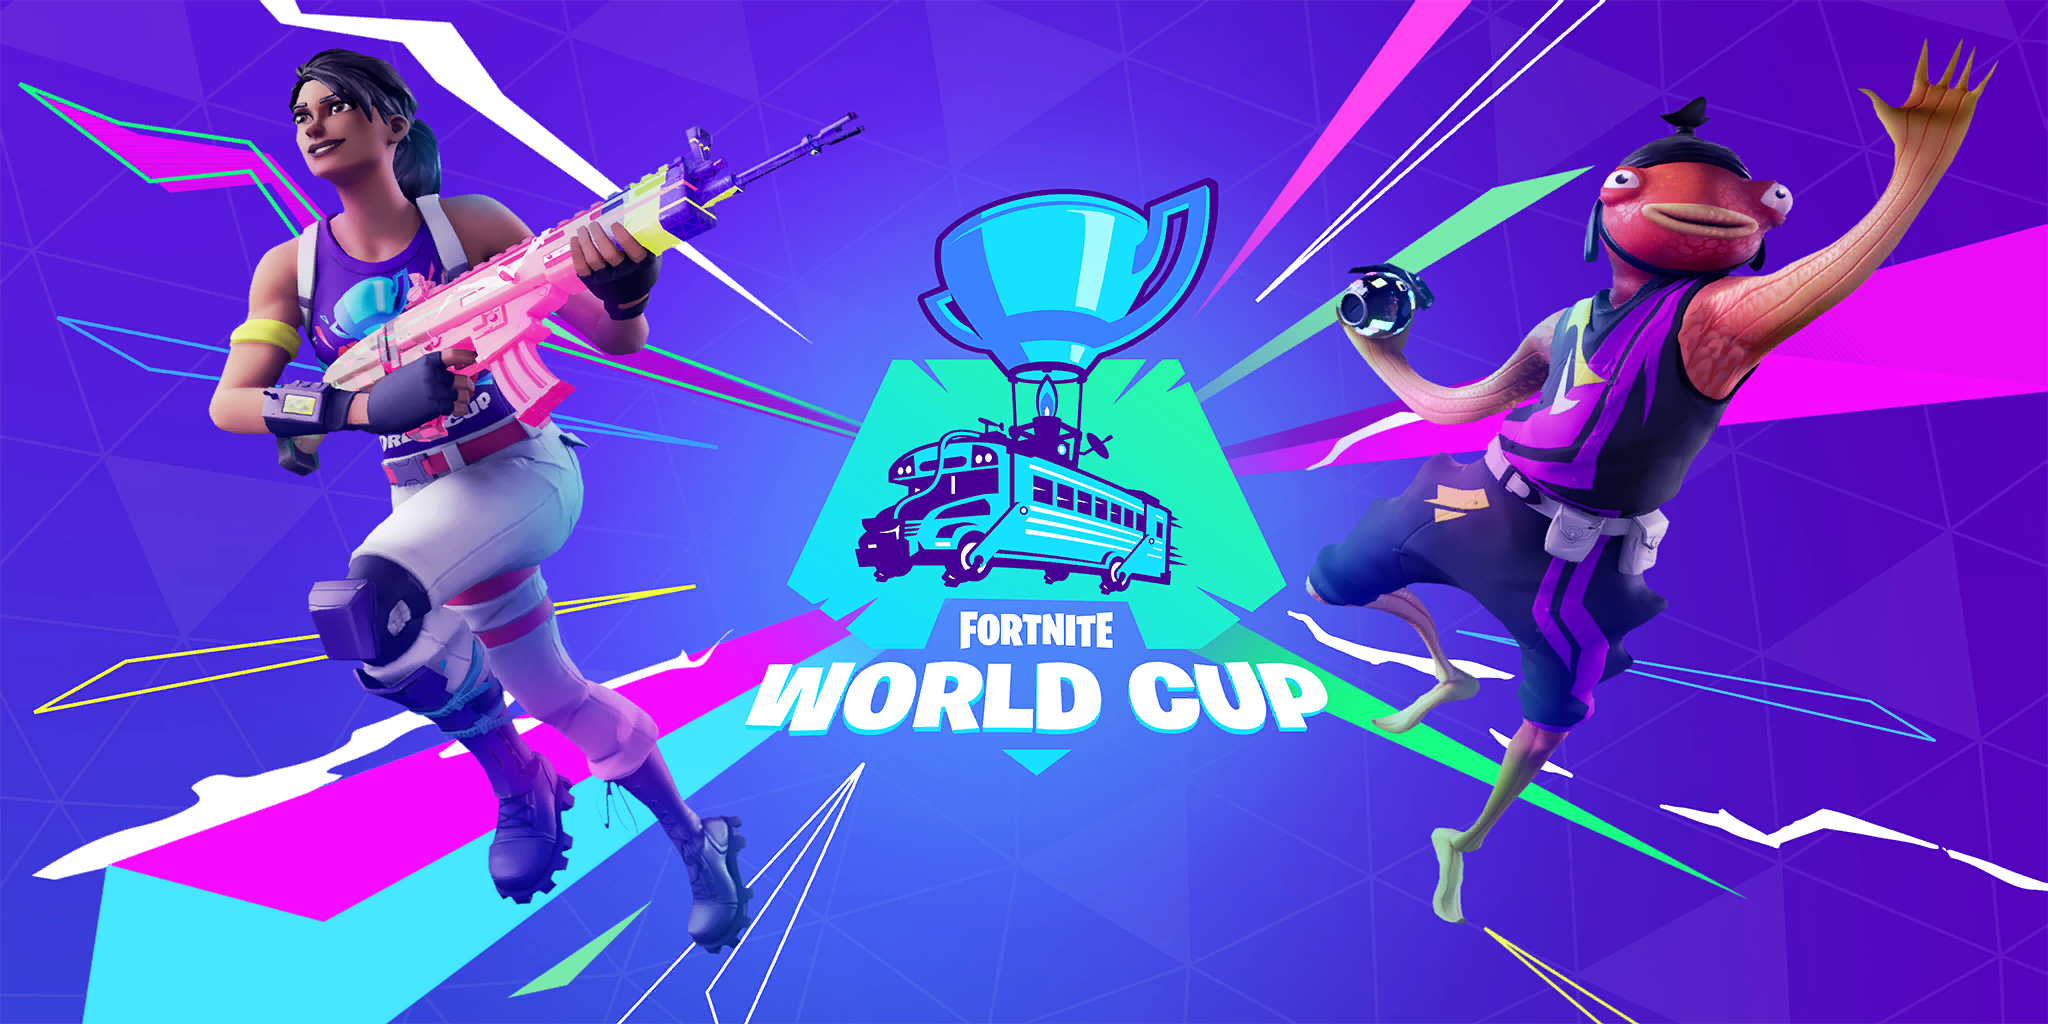 Fortnite Quest for the Cup Loading Screen Skin